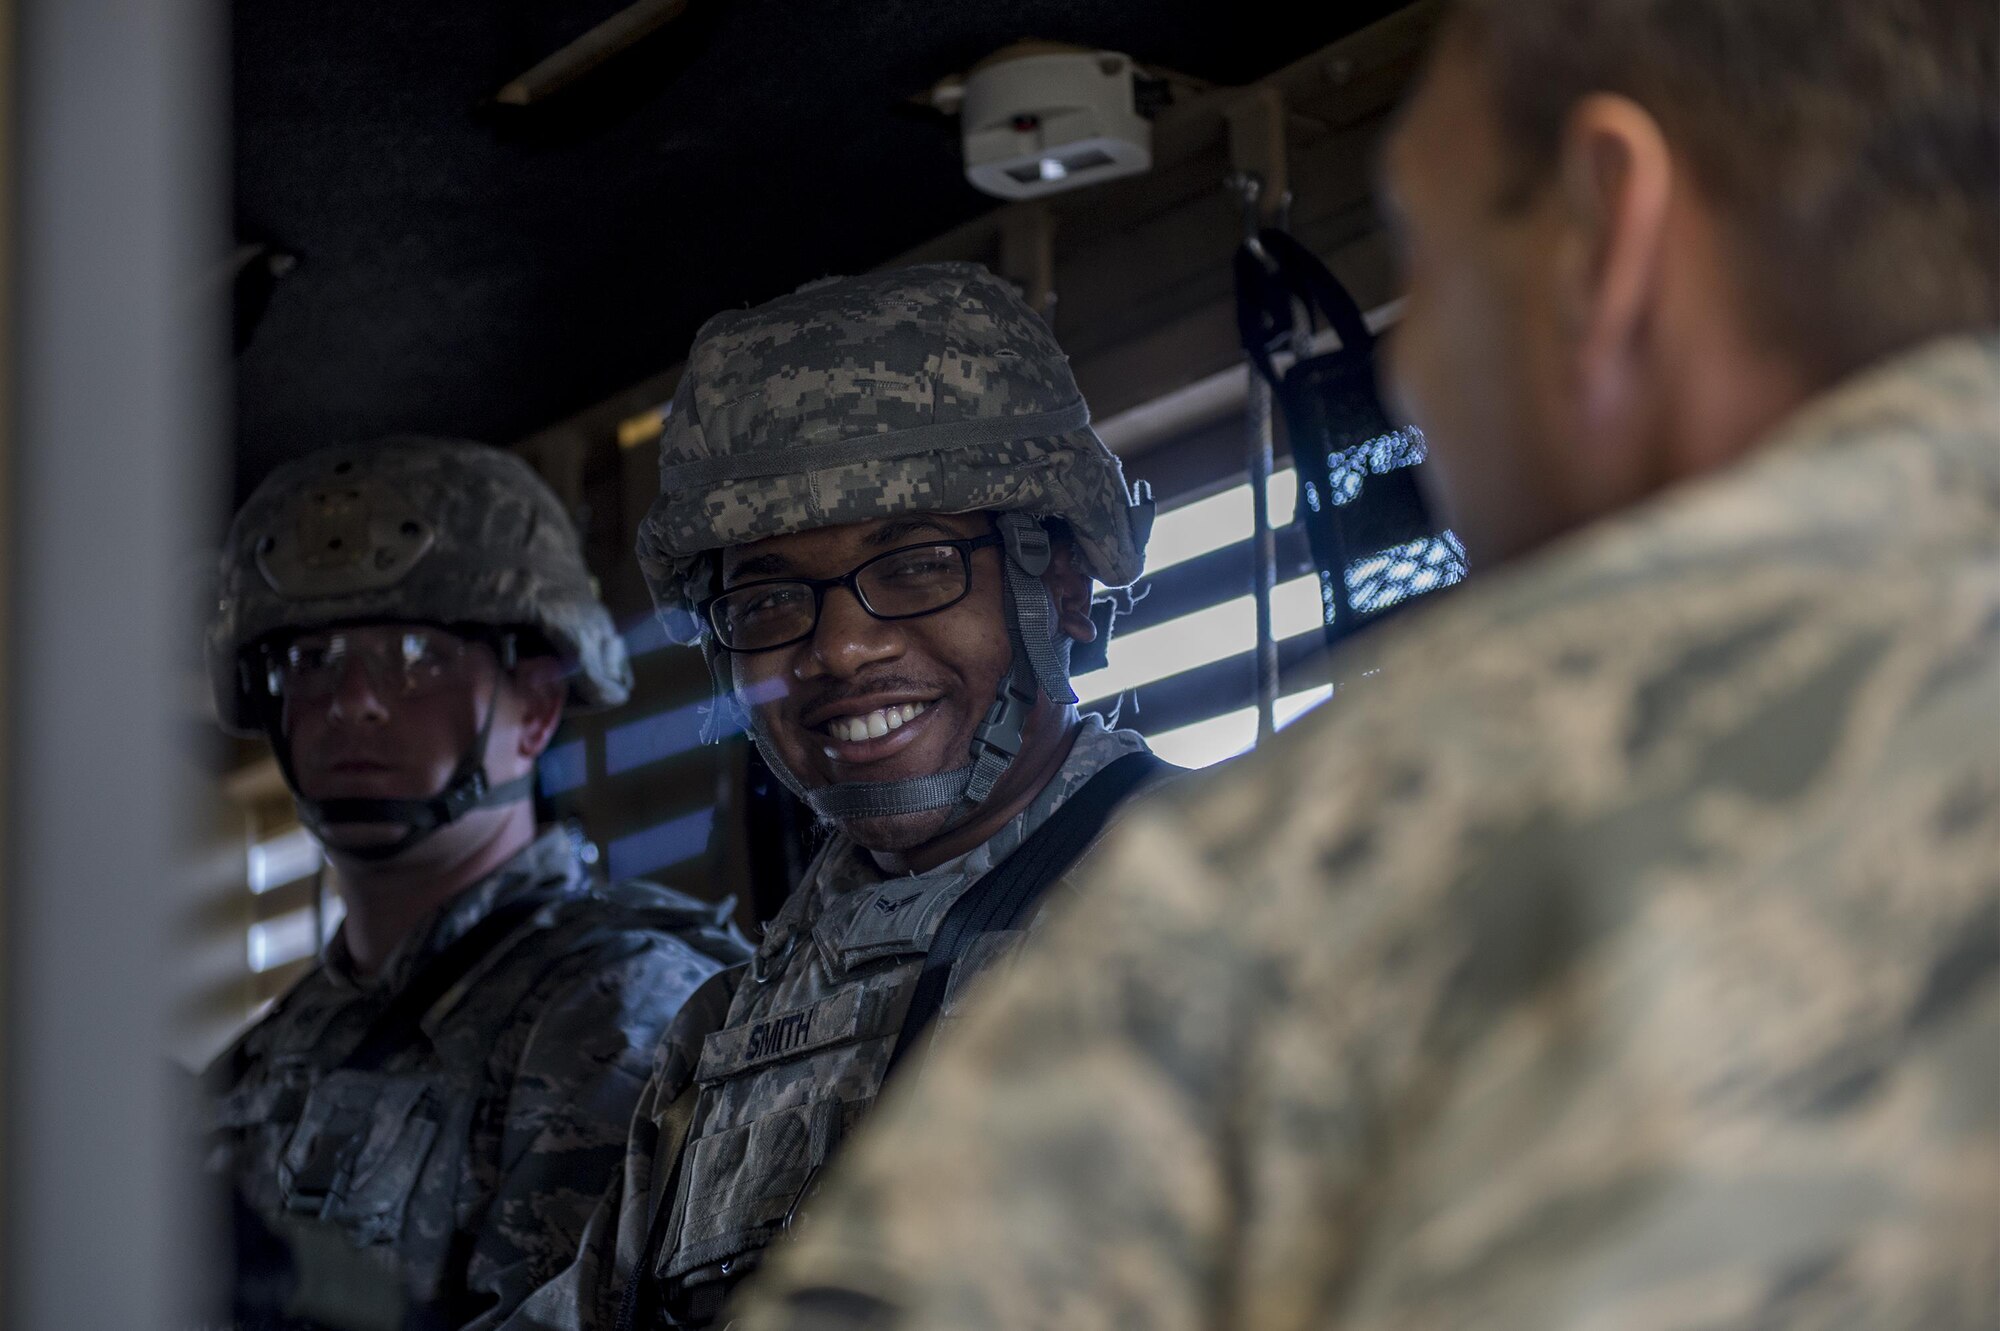 Airman 1st Class Vinson Smith, 105th Base Defense Squadron security forces member, smiles as he prepares for rollover training, Sept. 30, 2016, at Moody Air Force Base, Ga. While at Moody, members of the 105th BDS were able to train on an array of weapon systems as well as earn their license to drive mine-resistant, ambush-protected vehicles, also known as MRAPs. (U.S. Air Force photo by Tech. Sgt. Zachary Wolf)